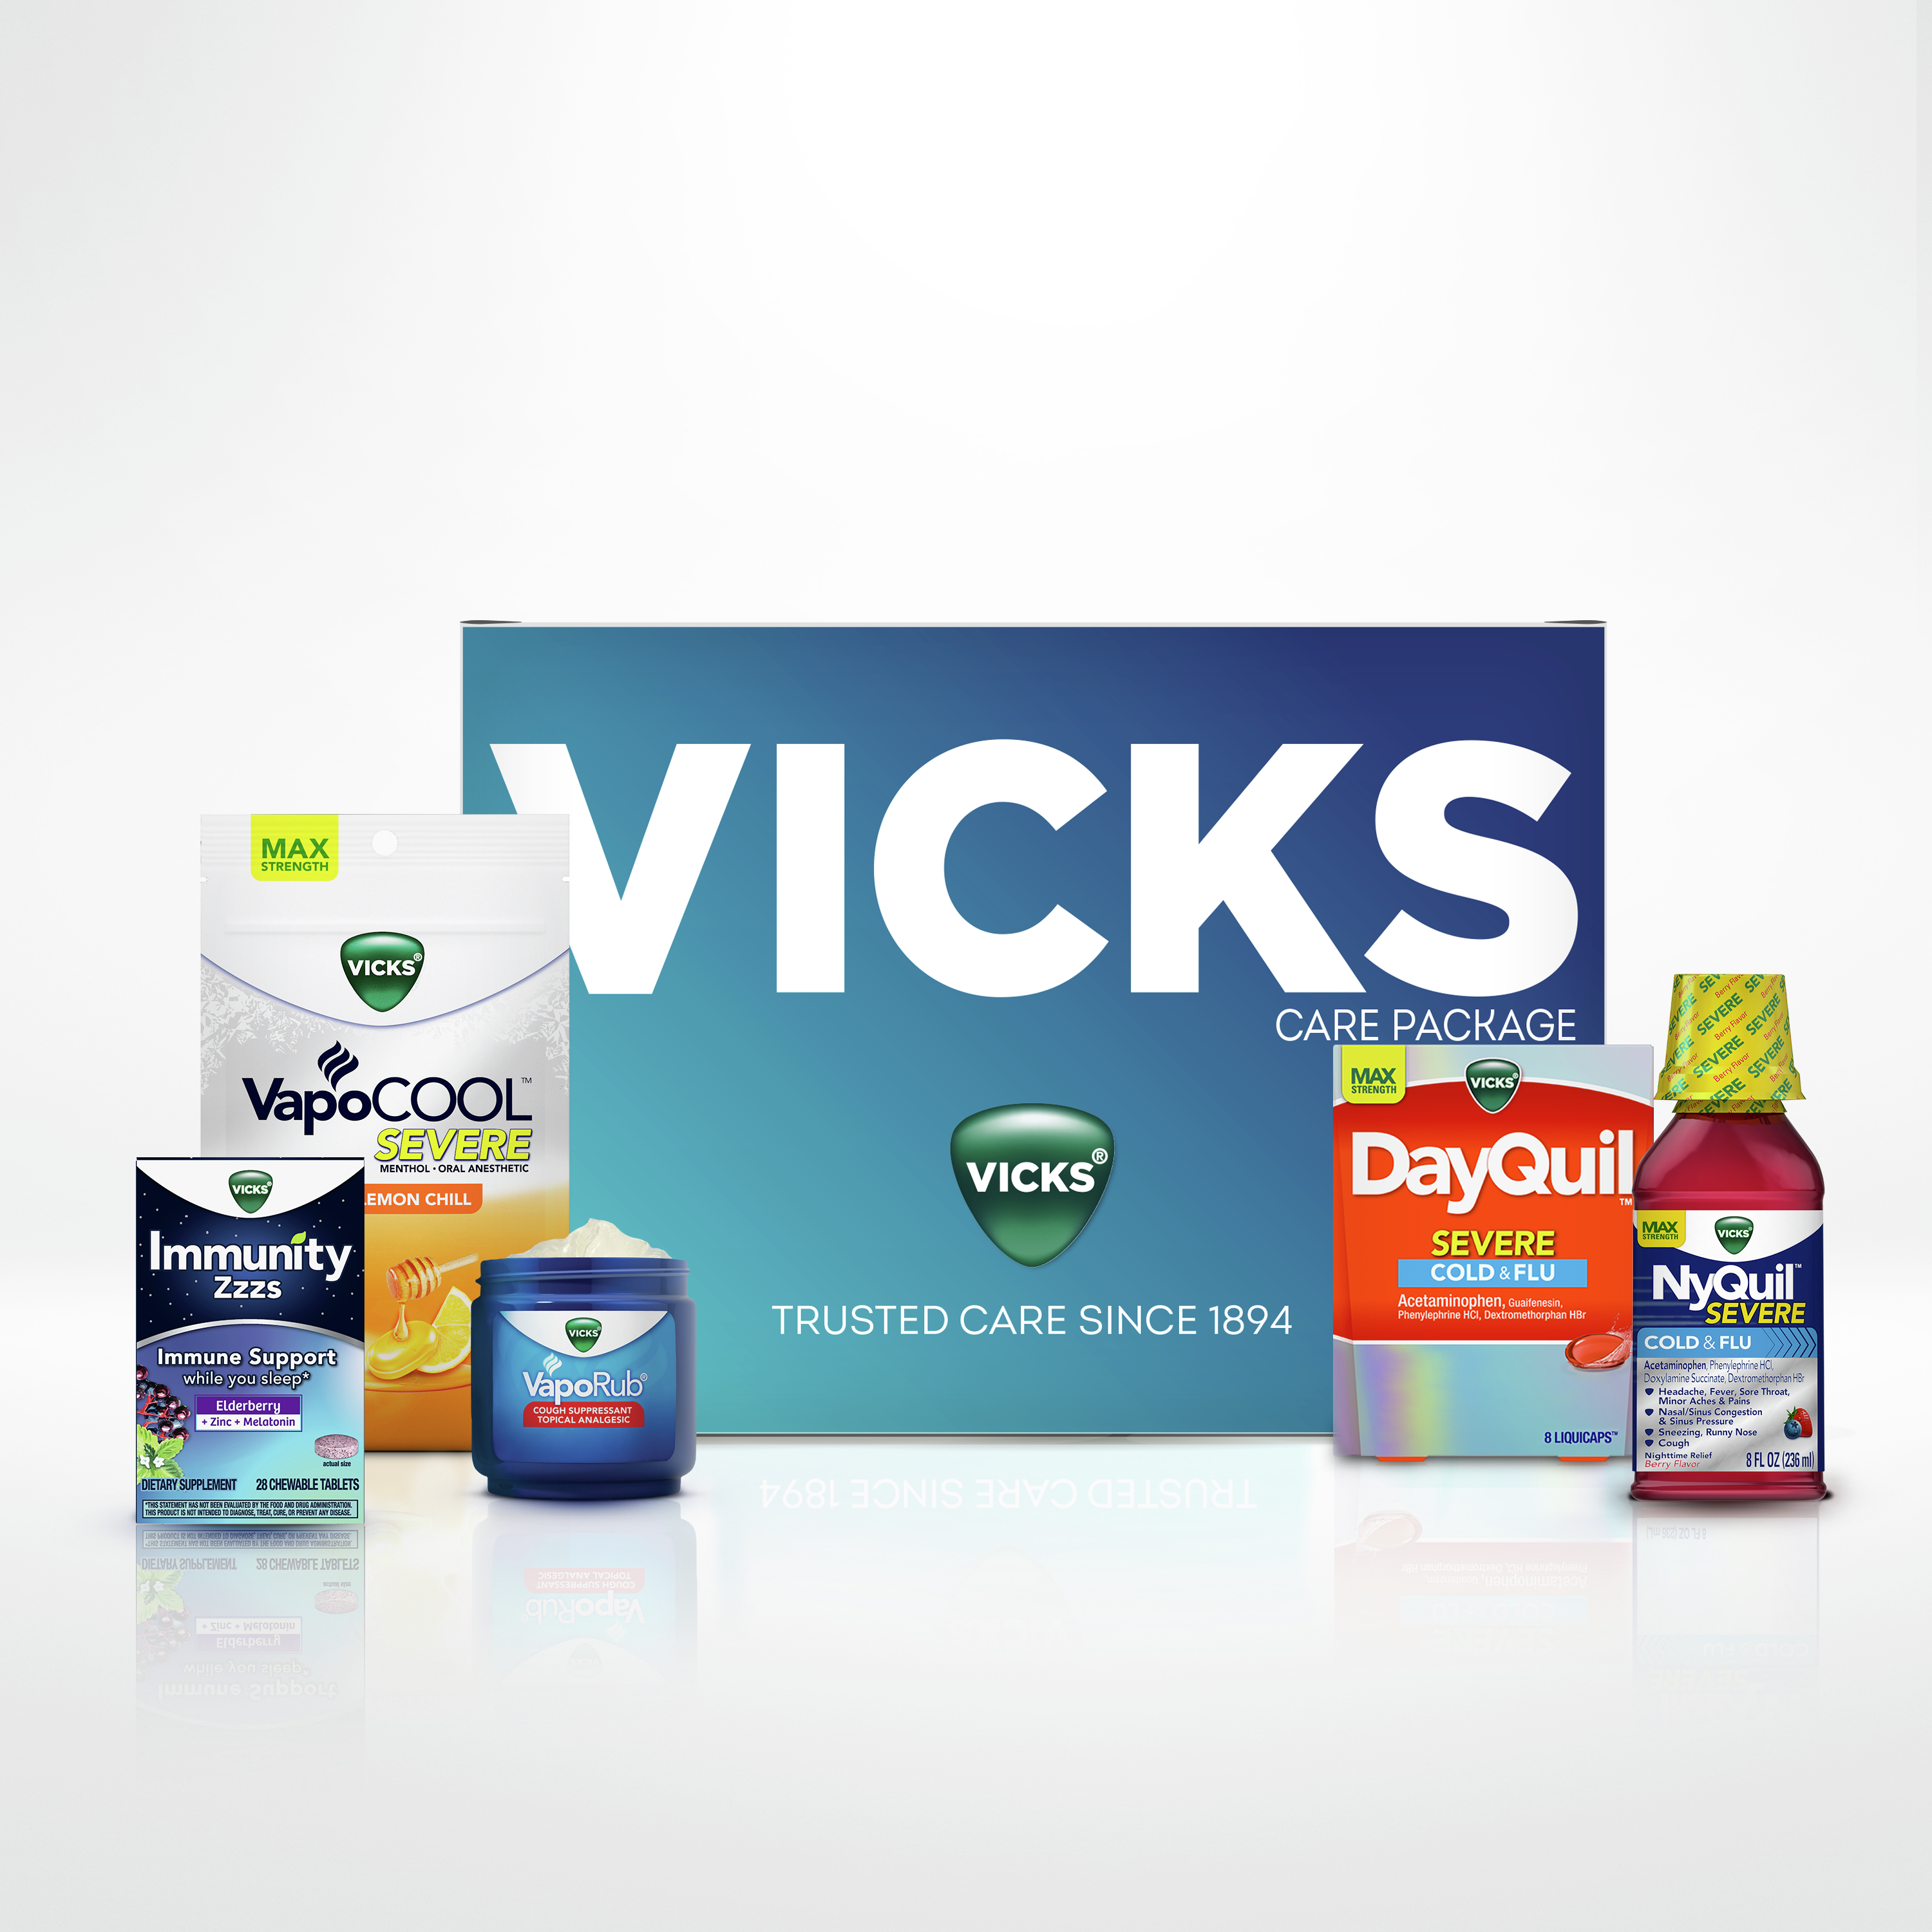 VICKS CARE PACKAGE Image 1